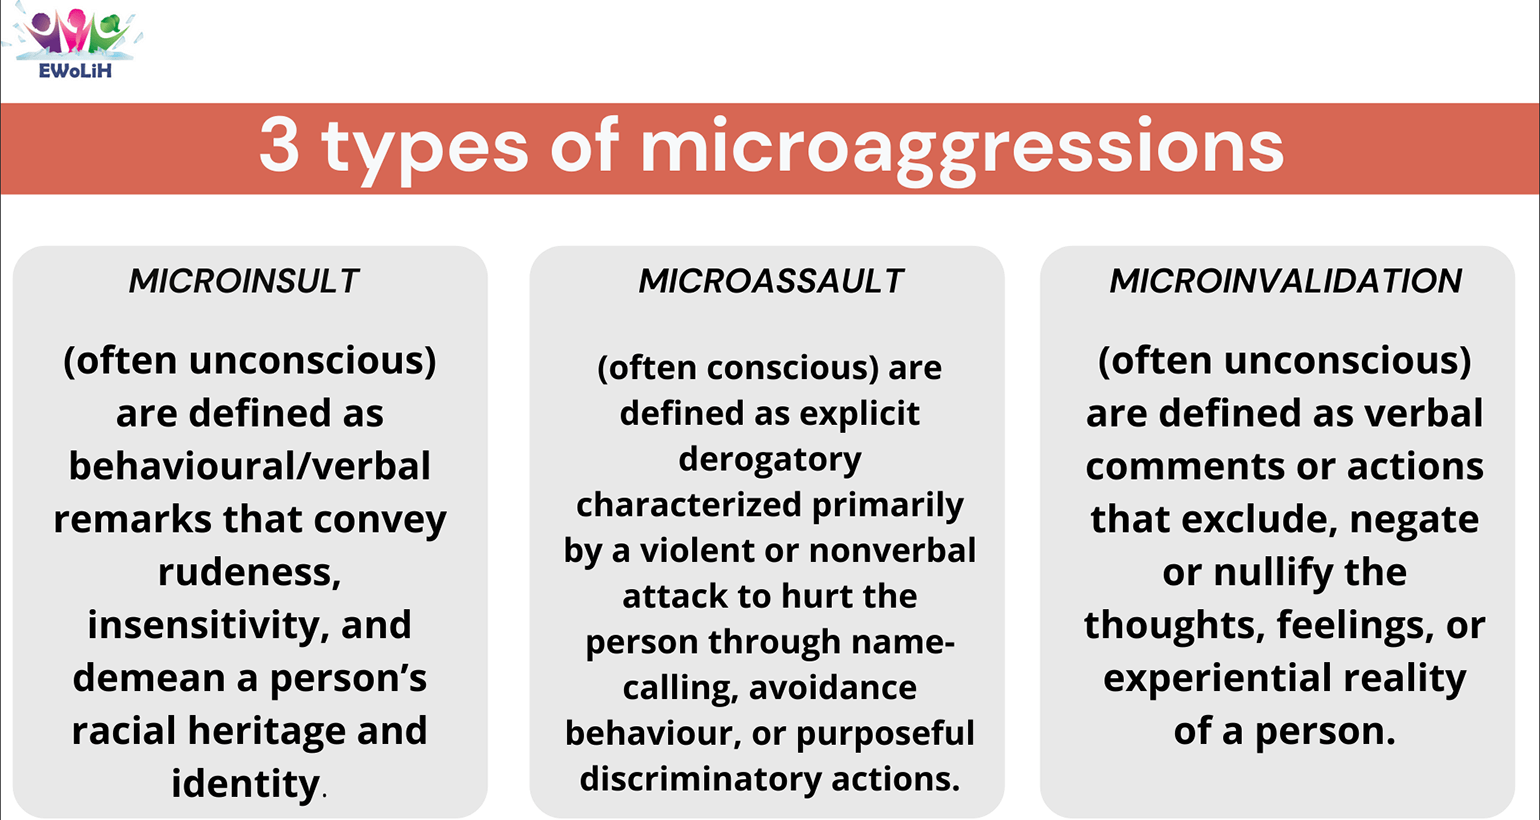 A red banner labels 3 types of microaggressions. Below that are three off-white bubbles with black text. The first is microinsult which is a behavior or remark that is insensitive to someone's identity. Second is microassault which is a violent or nonverbal attack and last is microinvalidation which is a comment or action that negates the feelings or reality of a person.